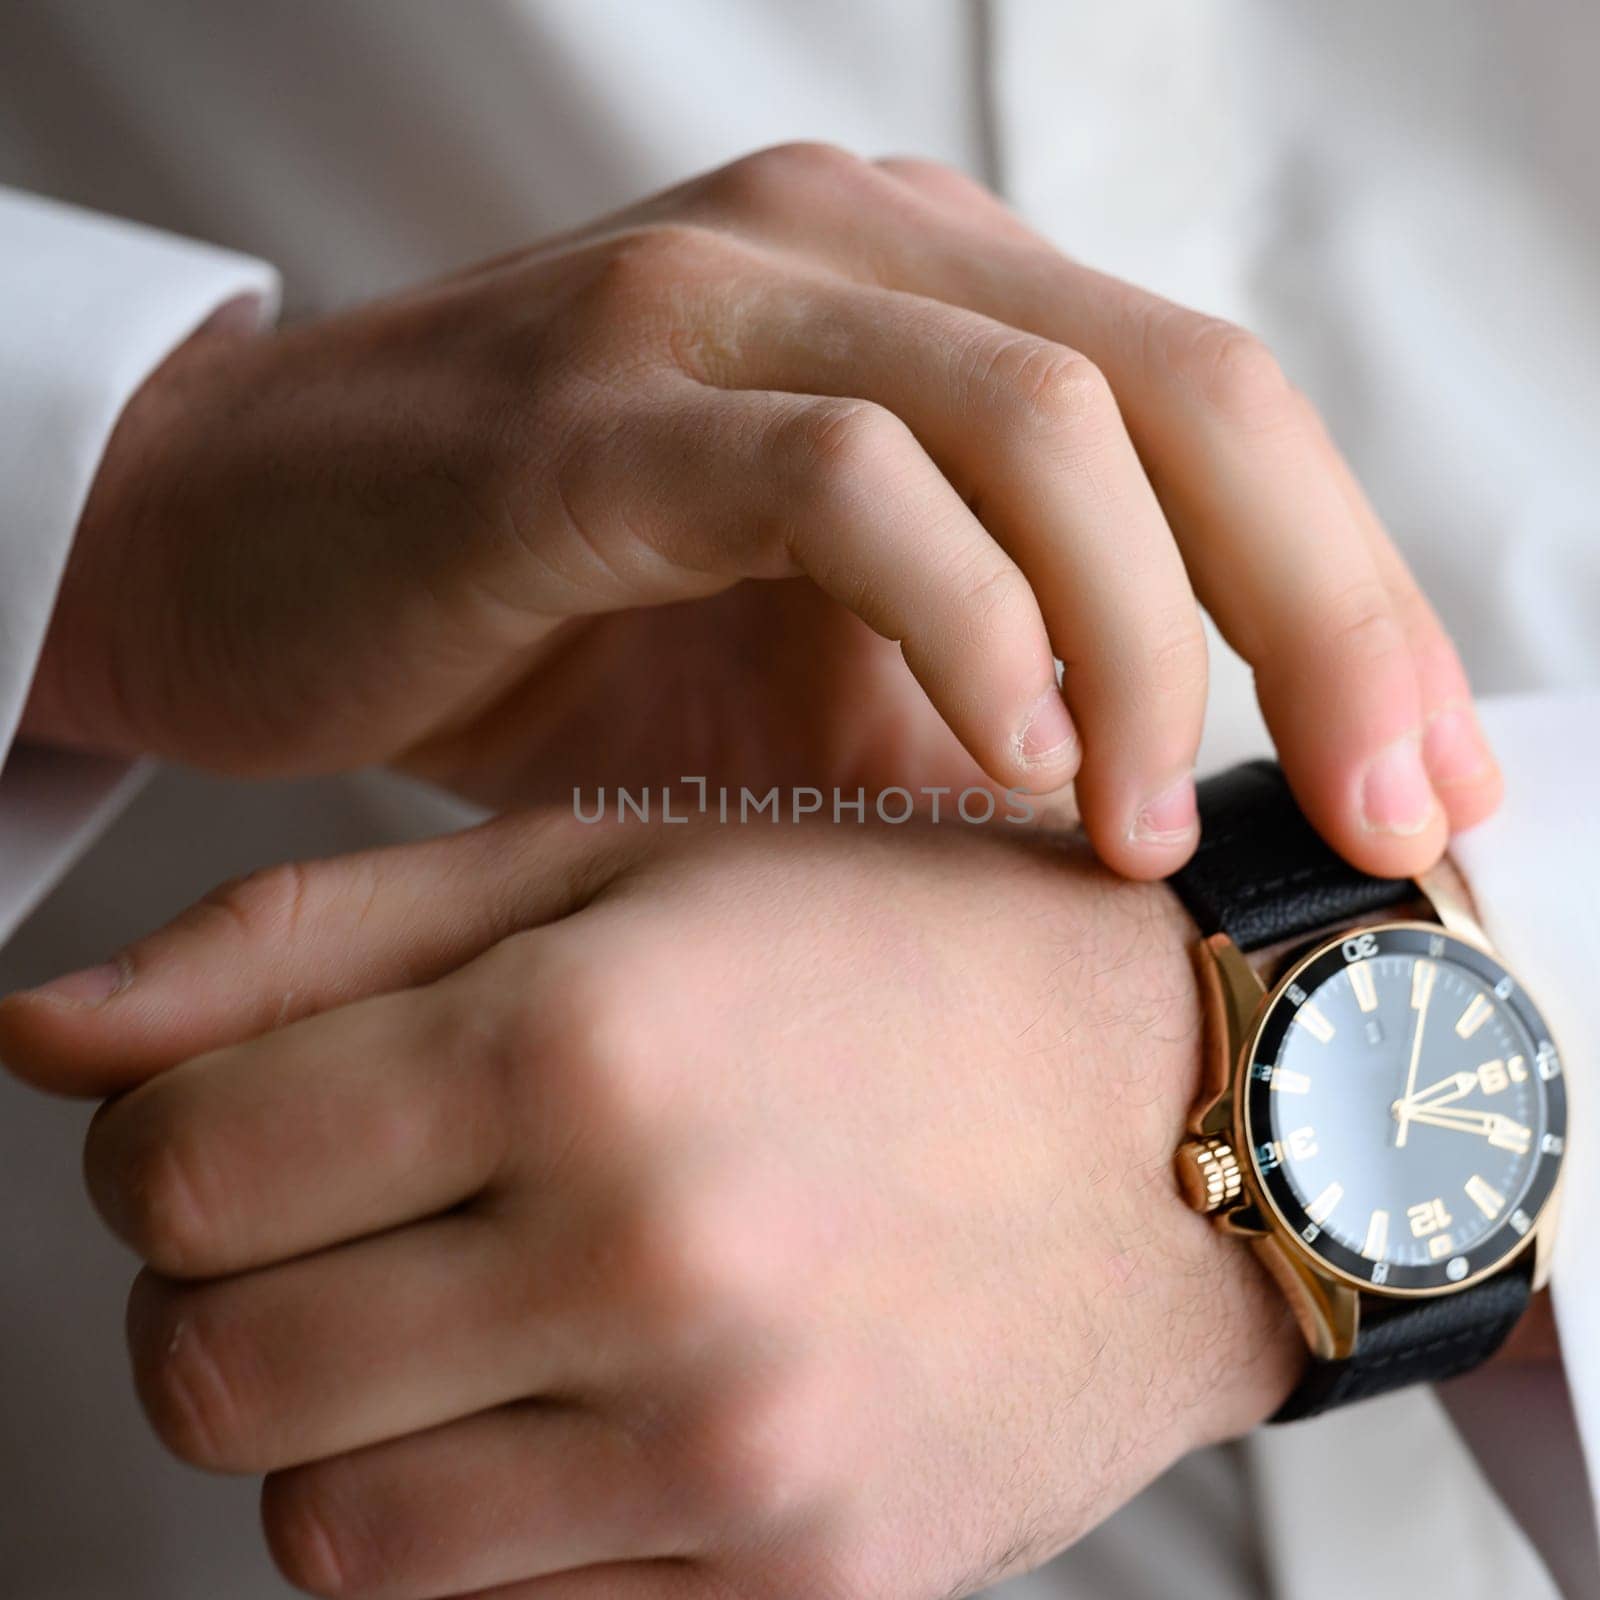 The morning of the groom on the wedding day before the wedding ceremony, the man adjusts the clock on his hand.